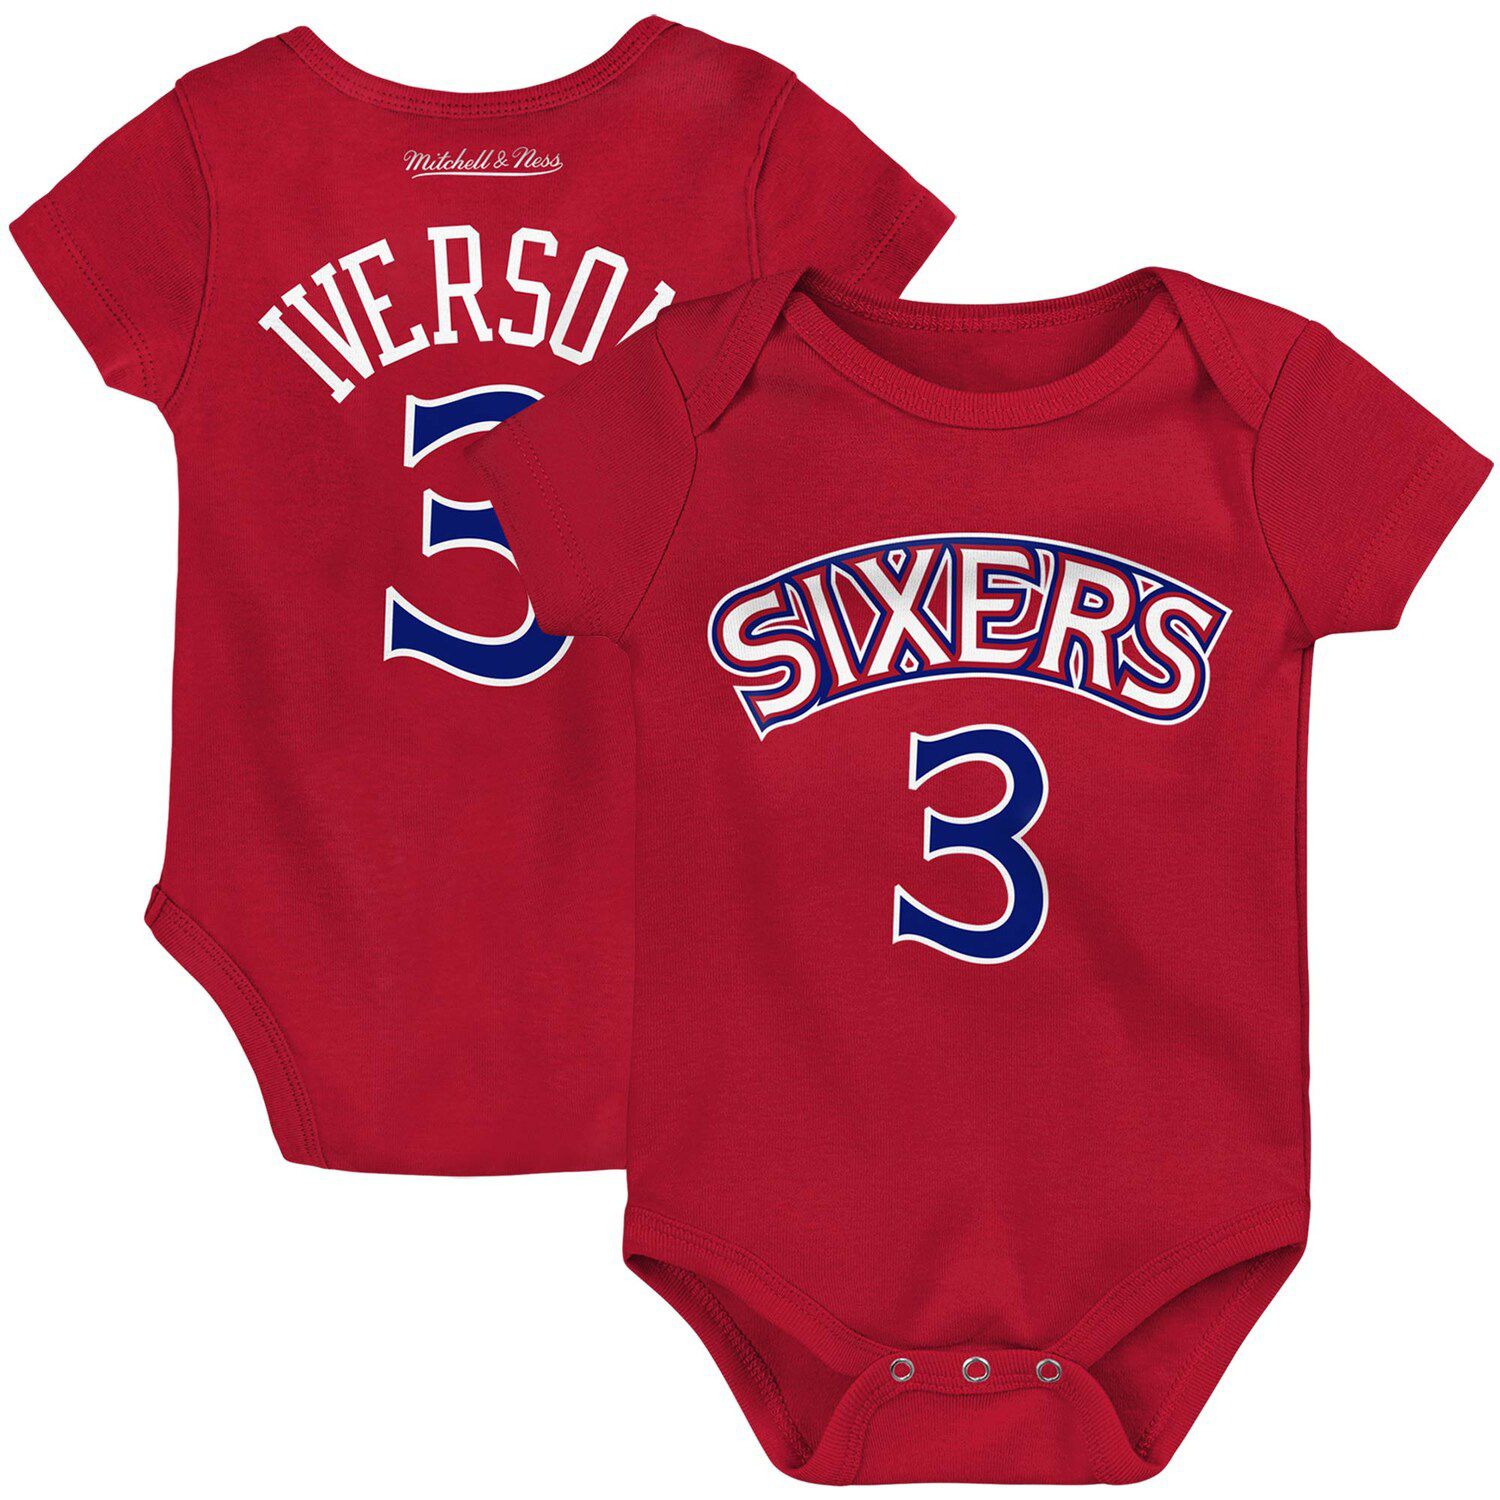 76ers baby/infant clothes 76ers baby gift Philadelphia basketball baby gift